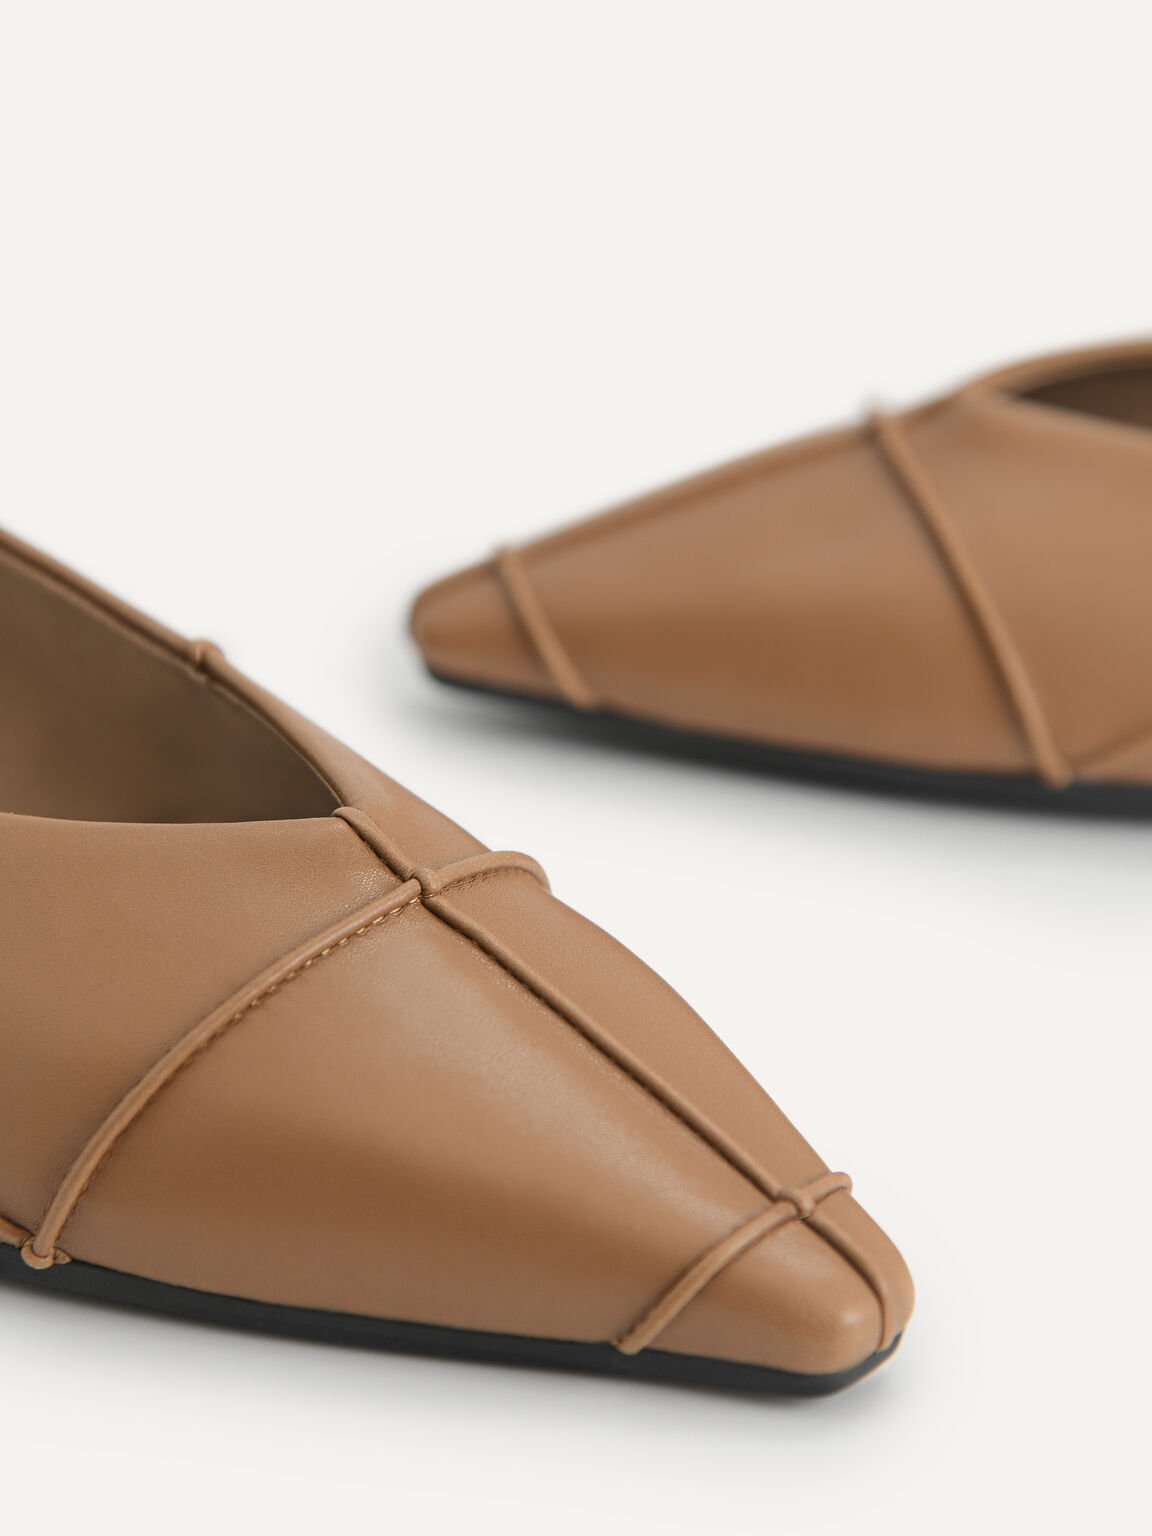 Pointed Toe Flats, Brown